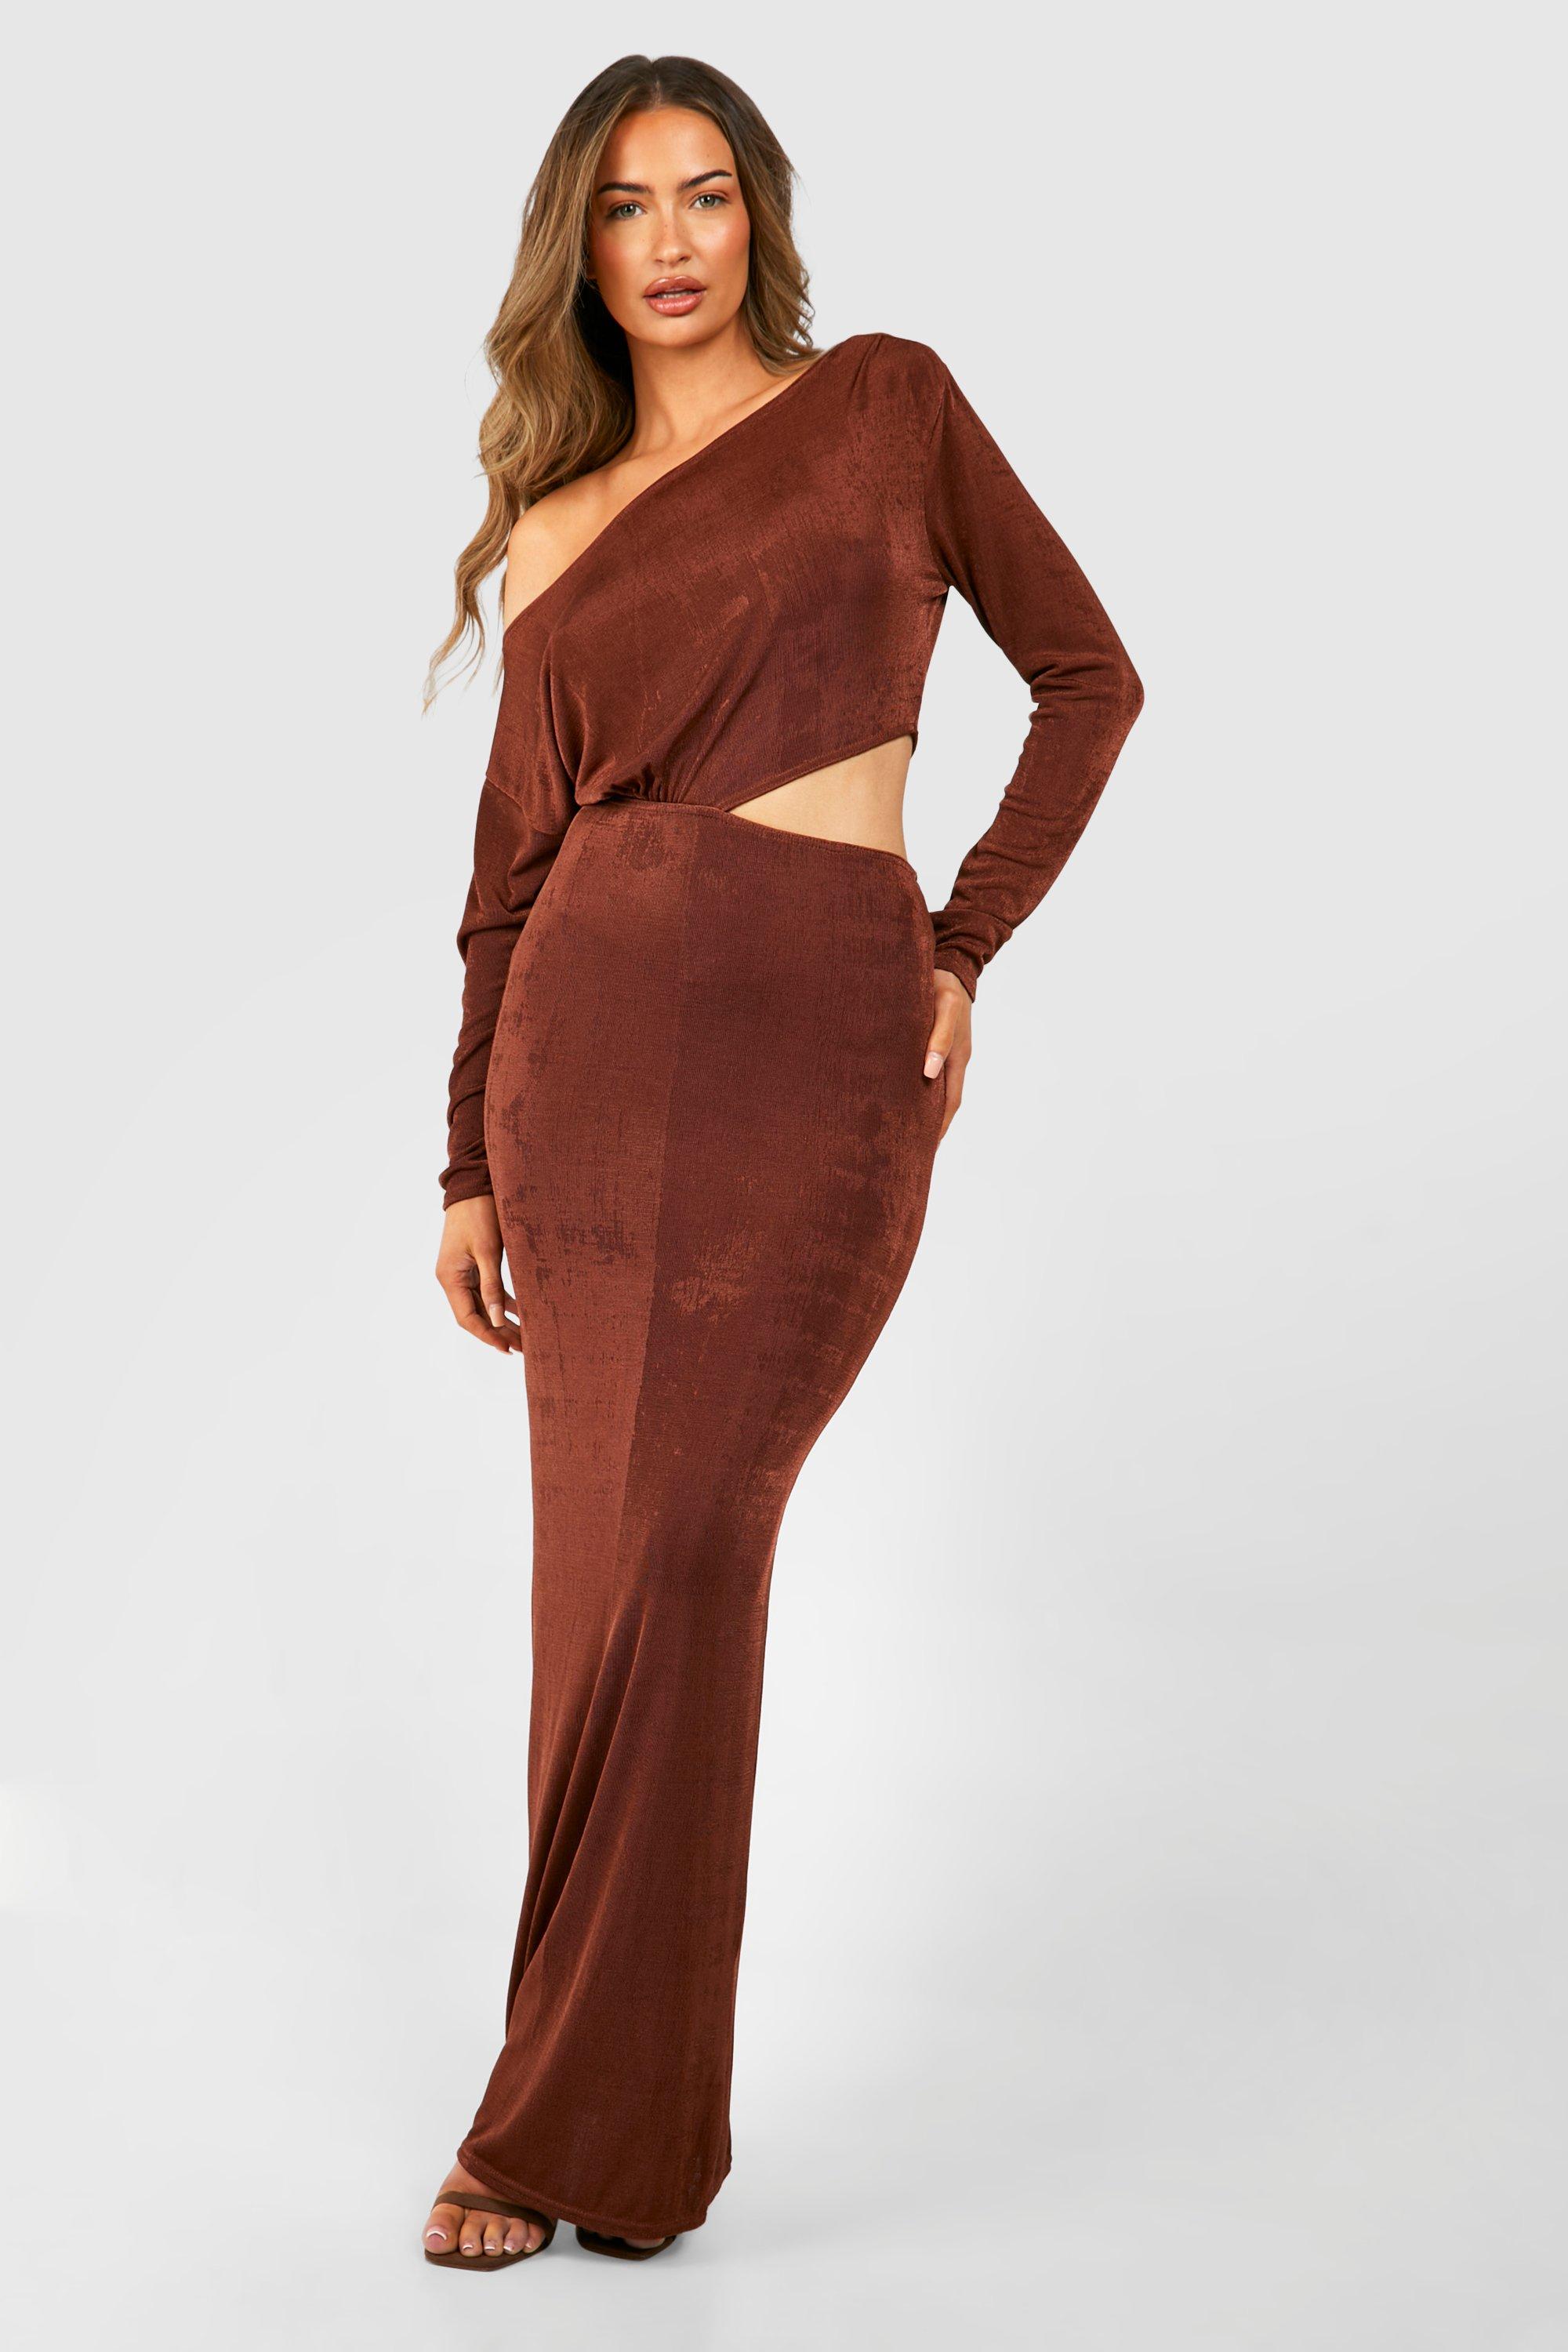 Boohoo Slash Neck Ruched Acetate Slinky Cut Out Maxi Dress, Chocolate